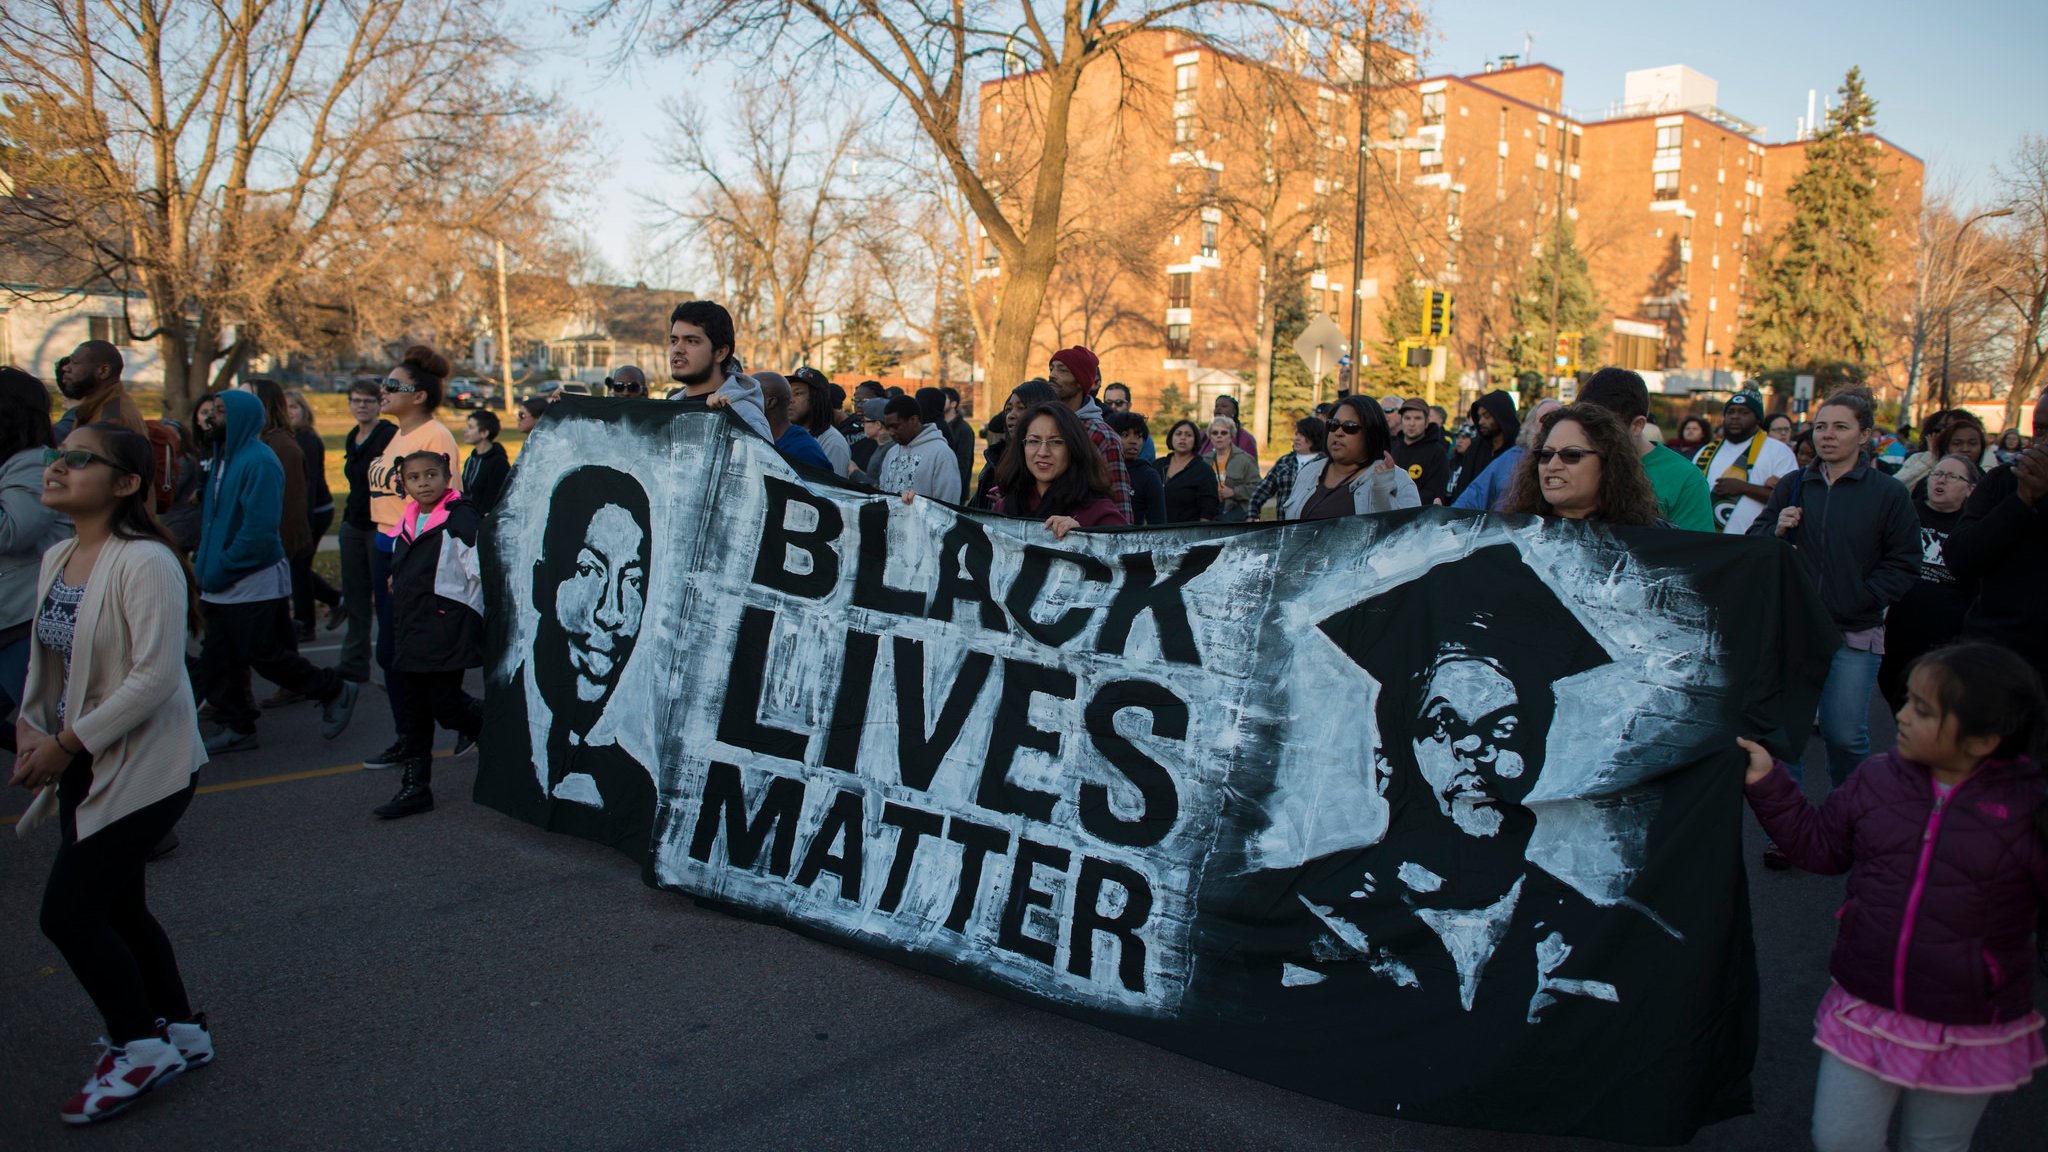 Protesters march in response to the death of Jamar Clark, who was shot by Minneapolis police in November 2015. (Fibonacci Blue / Flickr)